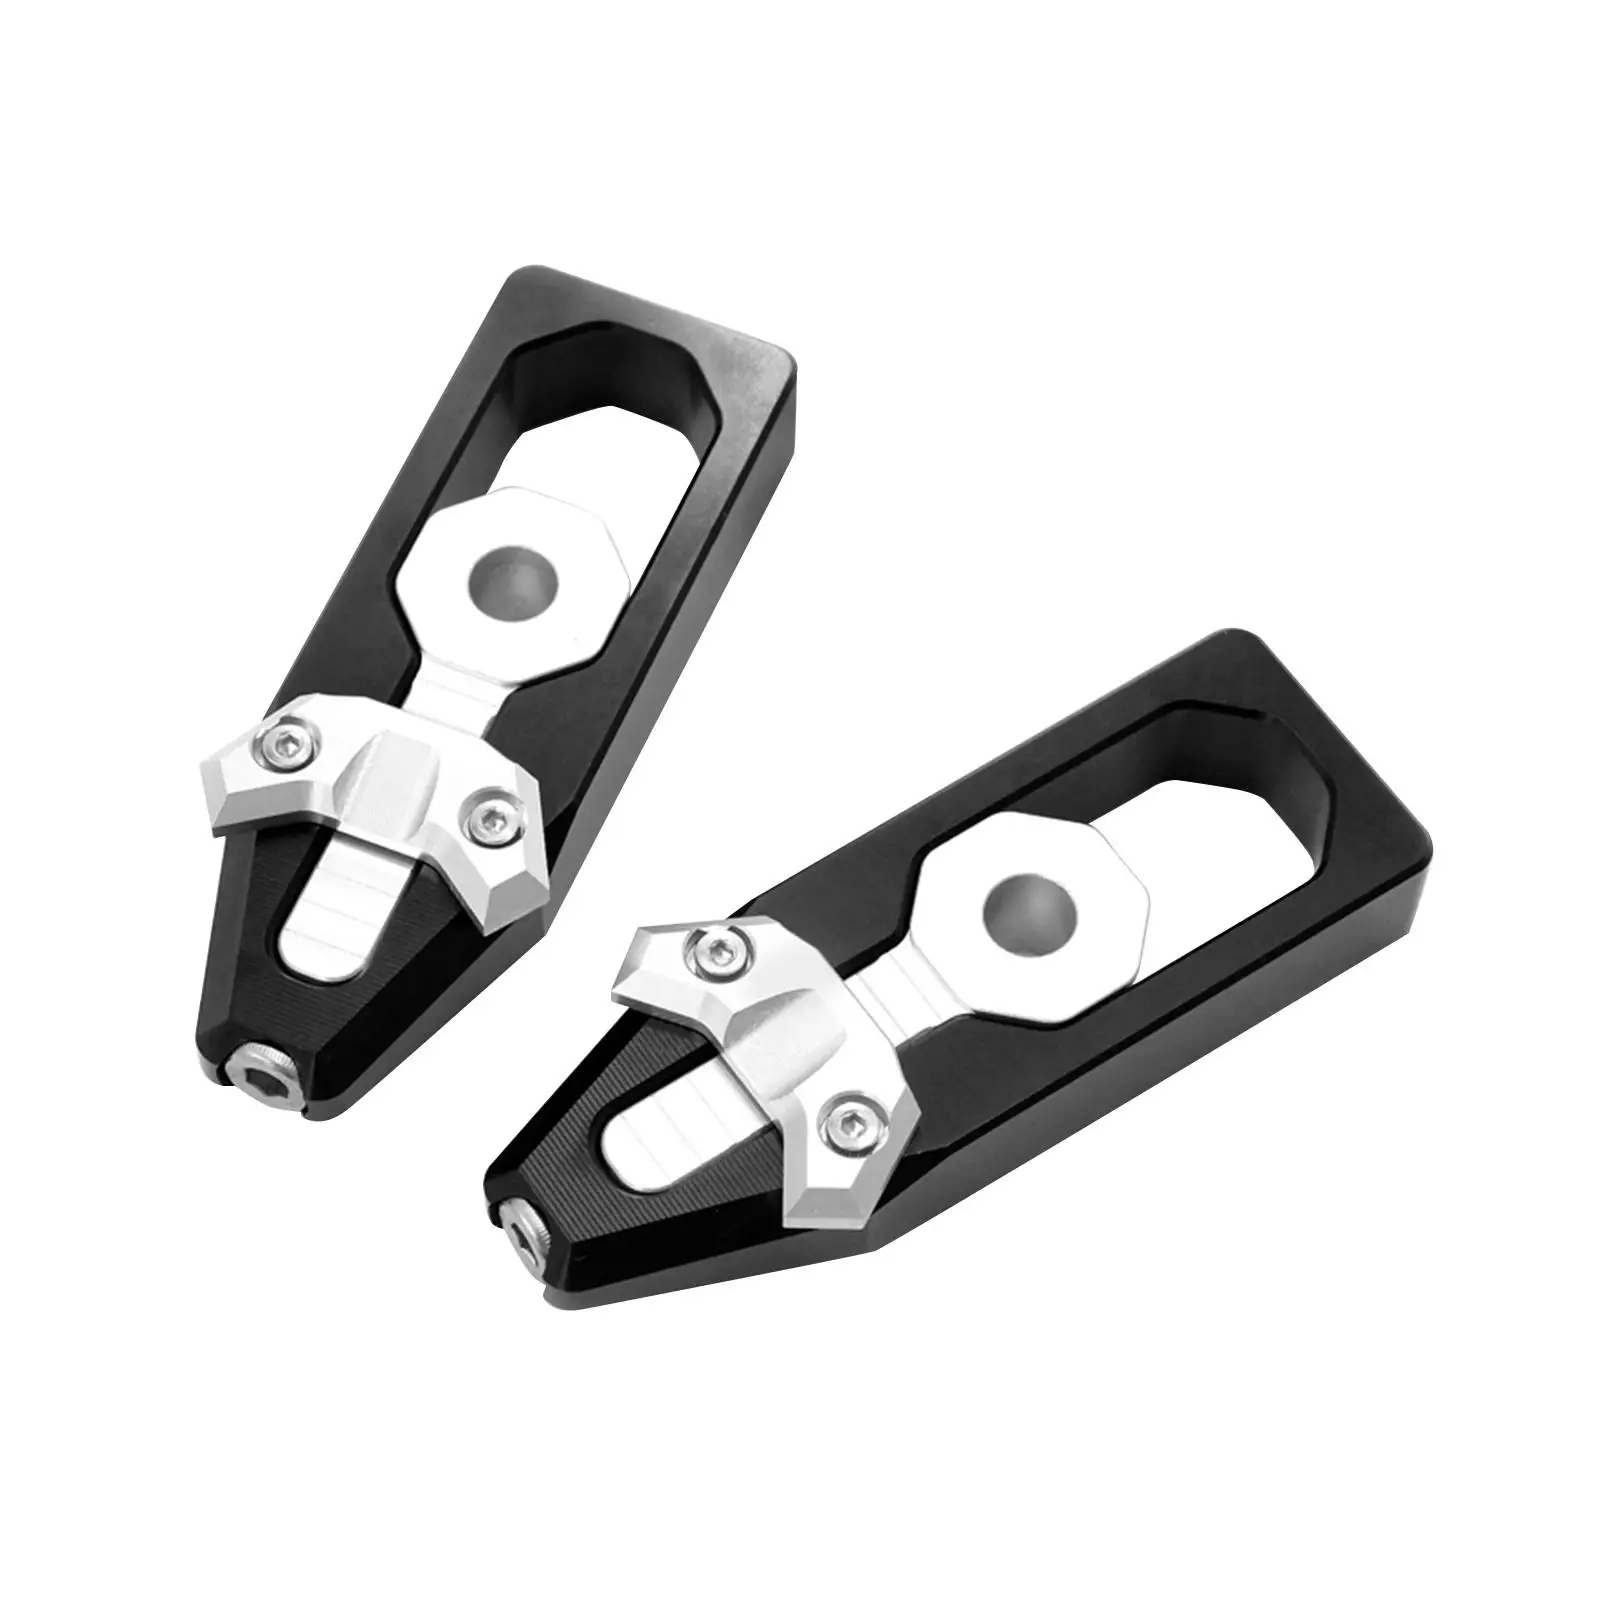 2 Pieces Motorcycle Chain Adjuster Set Motorcycle Chain Adjusting Tool